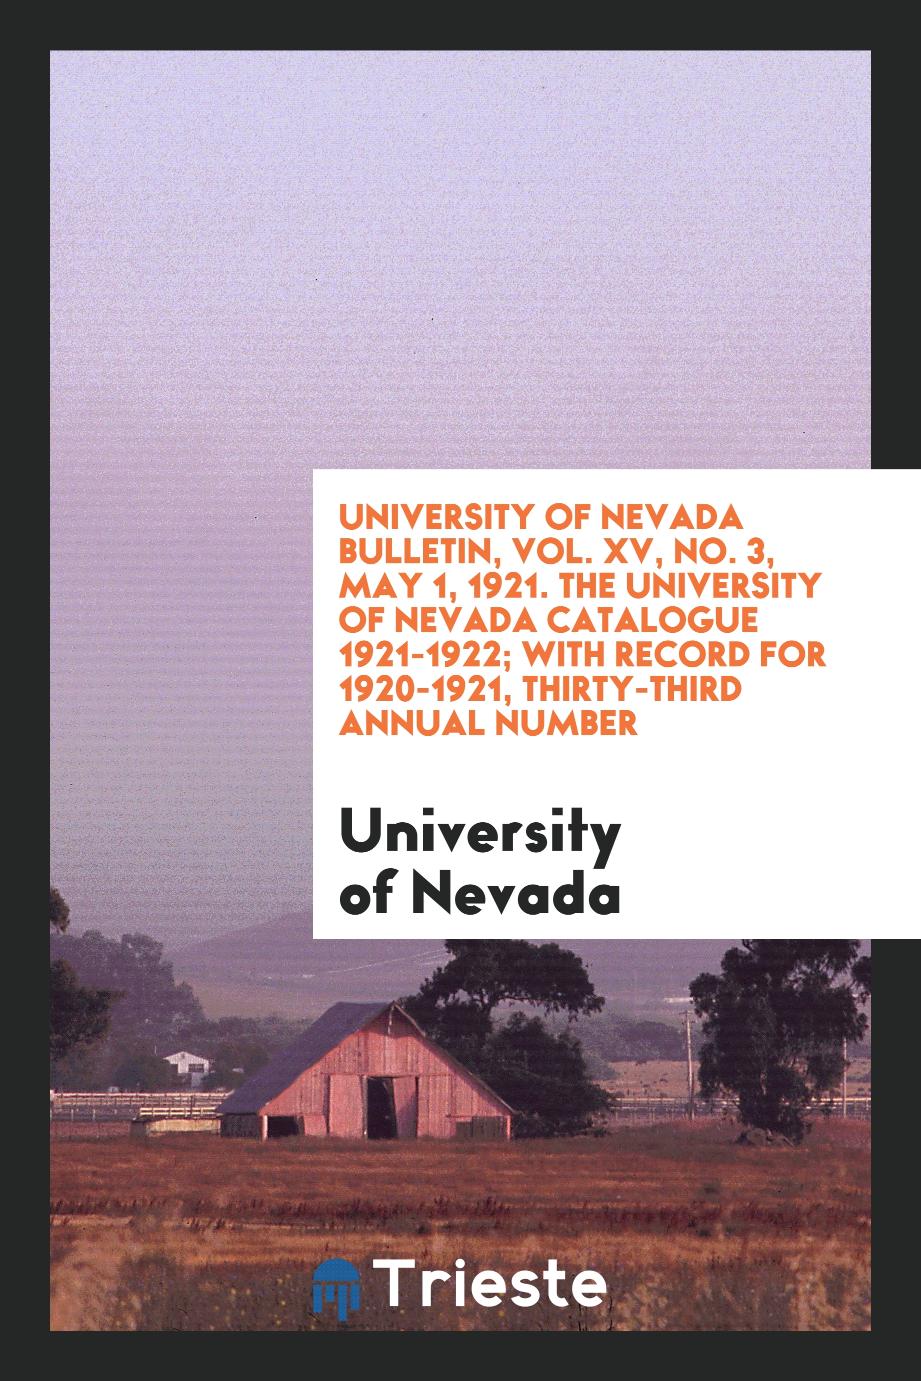 University of Nevada Bulletin, Vol. XV, No. 3, May 1, 1921. The University of Nevada Catalogue 1921-1922; With Record for 1920-1921, Thirty-Third Annual Number